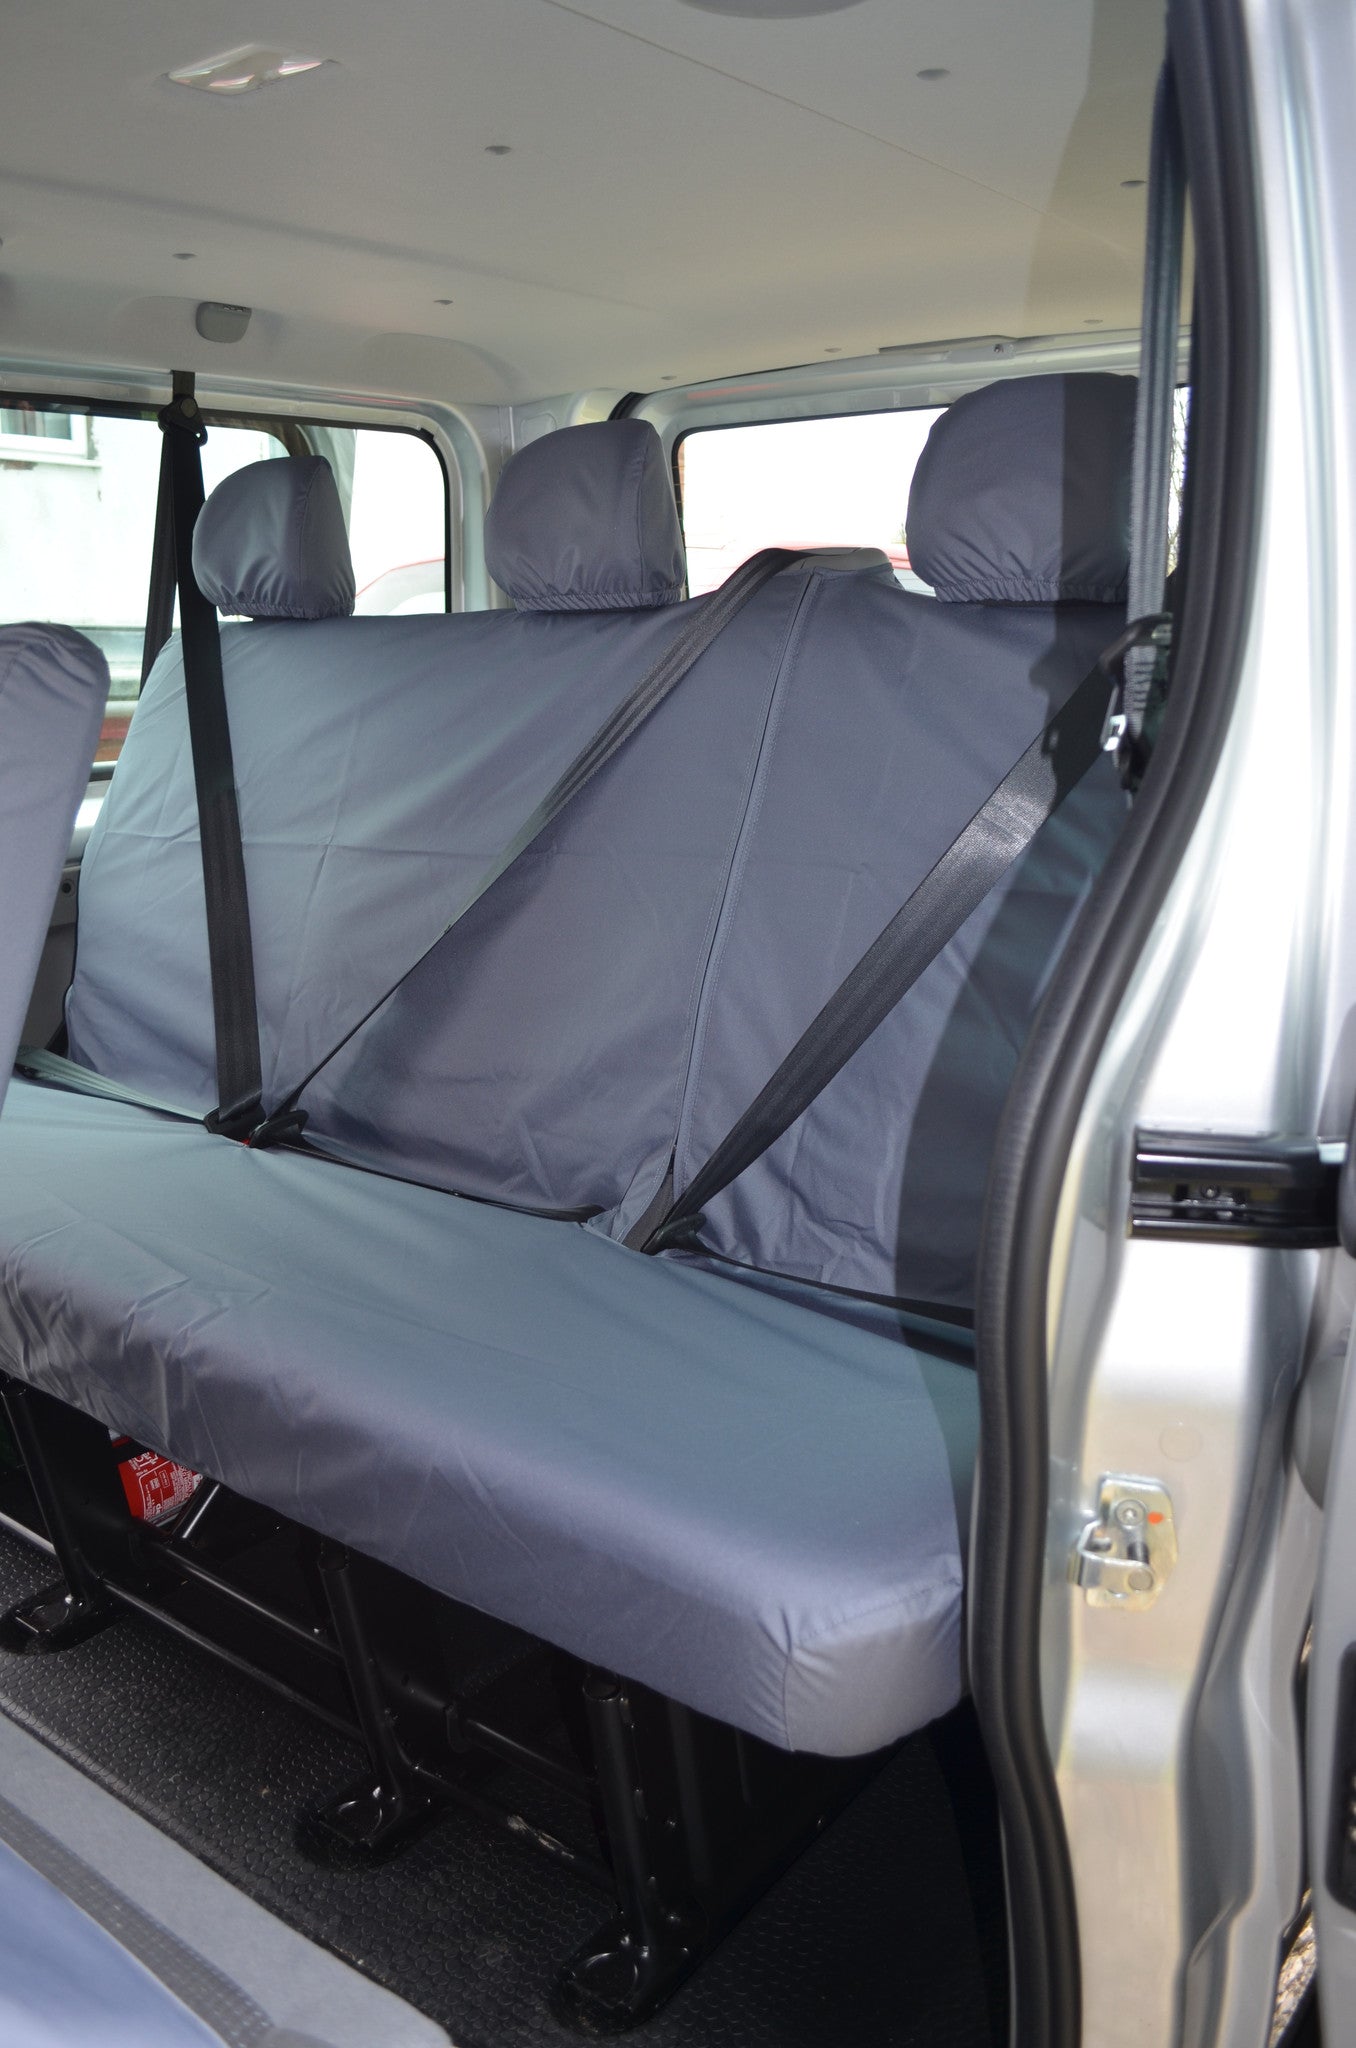 Renault Trafic Passenger 2001 - 2006 Seat Covers Grey / 3rd Row Bench Scutes Ltd